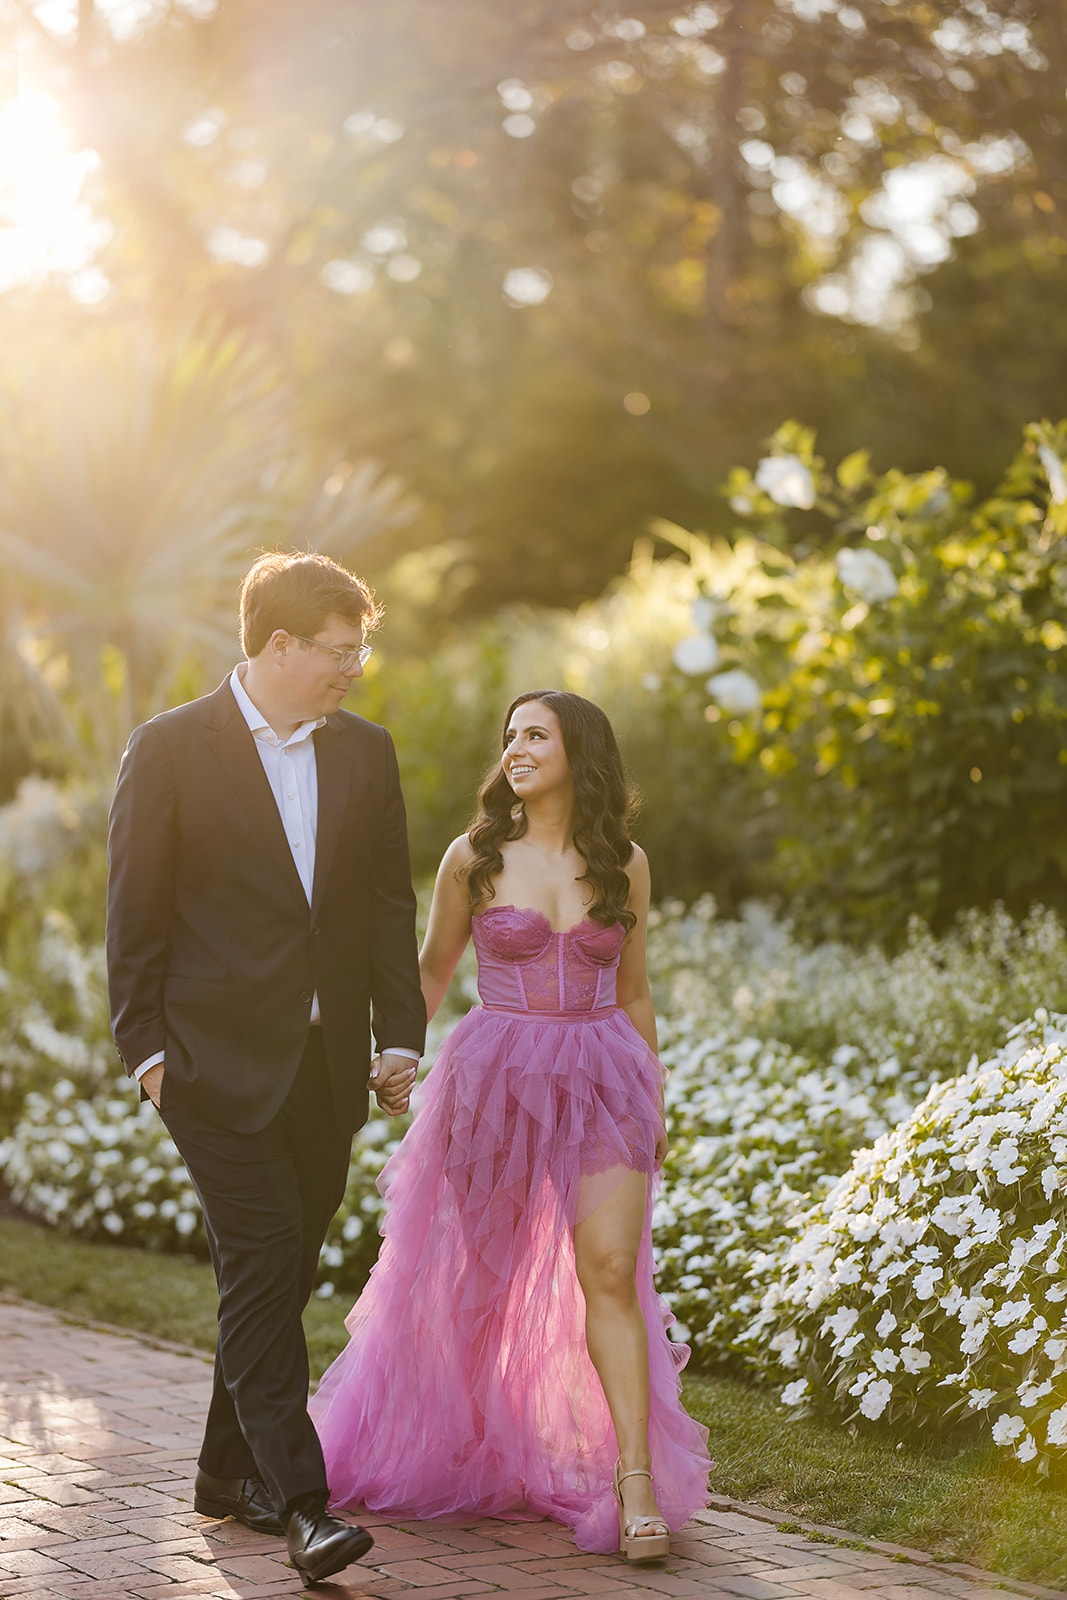 Stunning editorial and timeless engagement session at sunset in Philadlephia